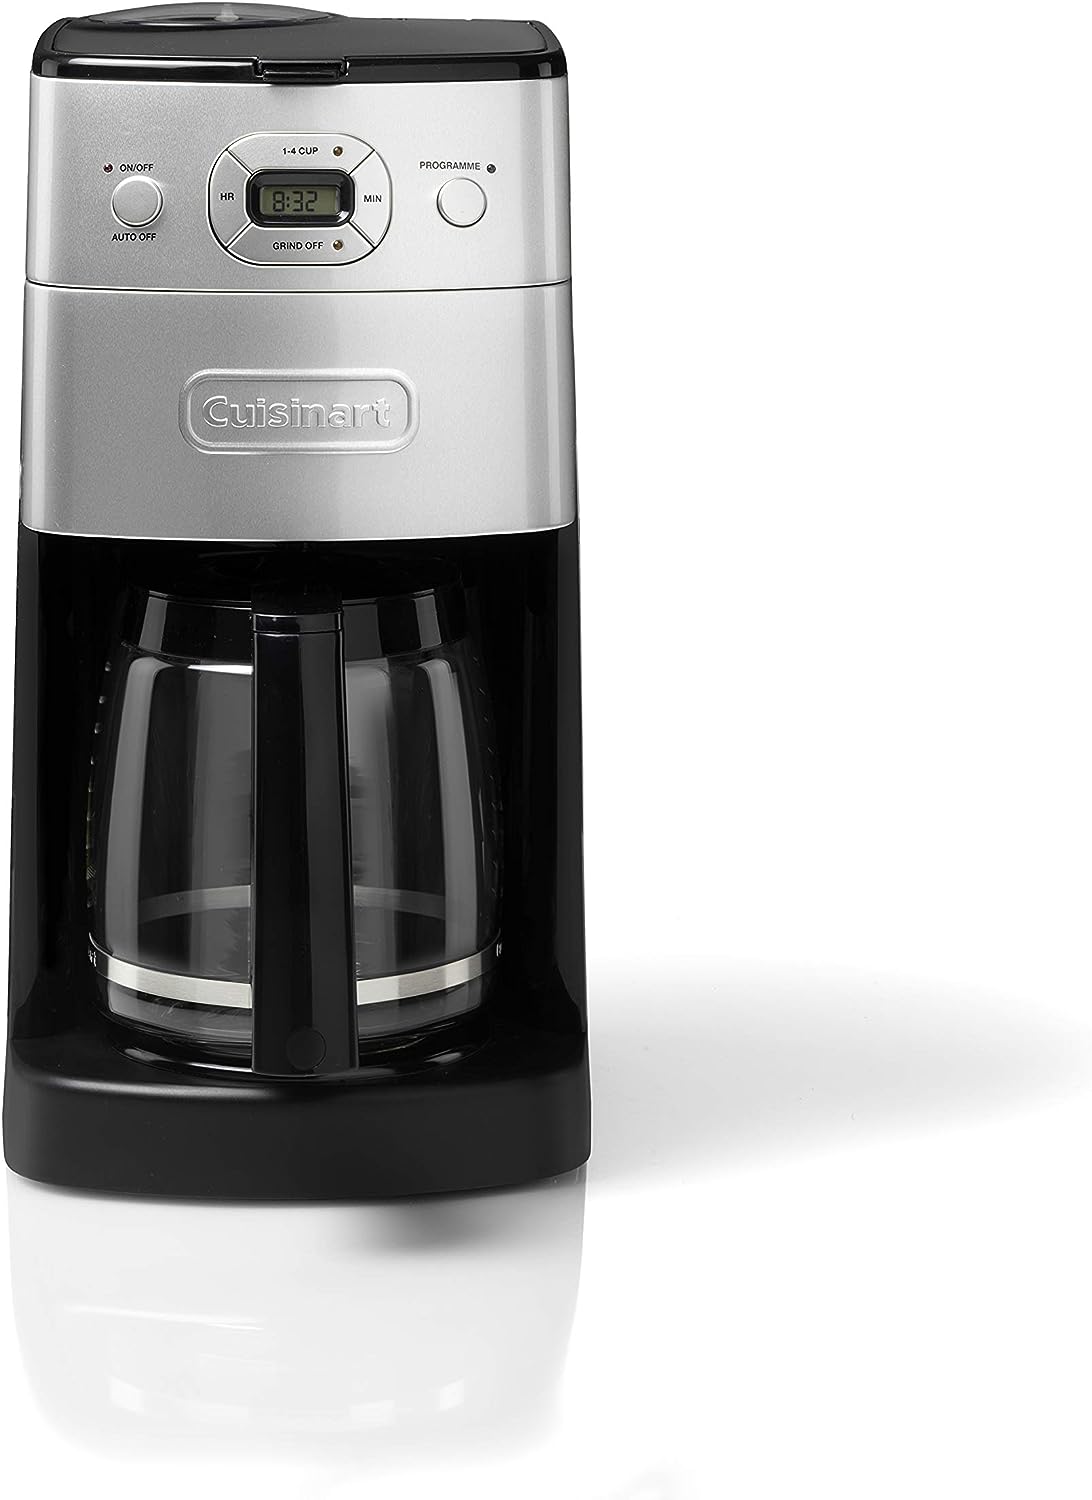 Cuisinart DGB625BCU Grind and Brewing Coffee Machine, Brushed Stainless Steel with * UK Plug Adapter * *